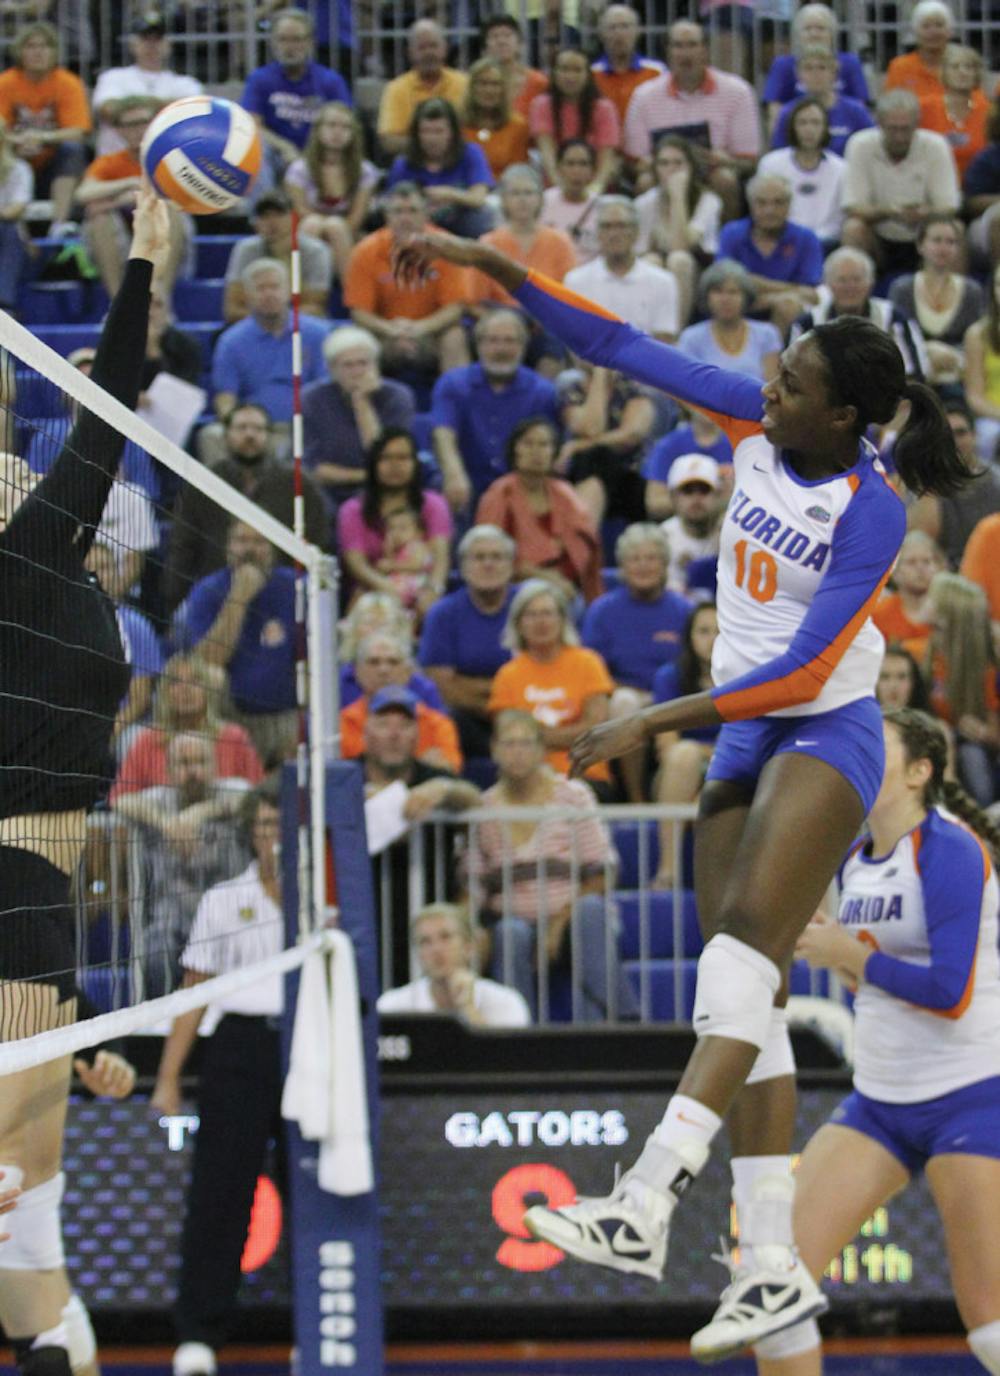 <p>Junior middle-blocker Chloe Mann attacks the Missouri defense. Florida won the match 3-0 at the Stephen C. O'Connell Center on Friday night.</p>